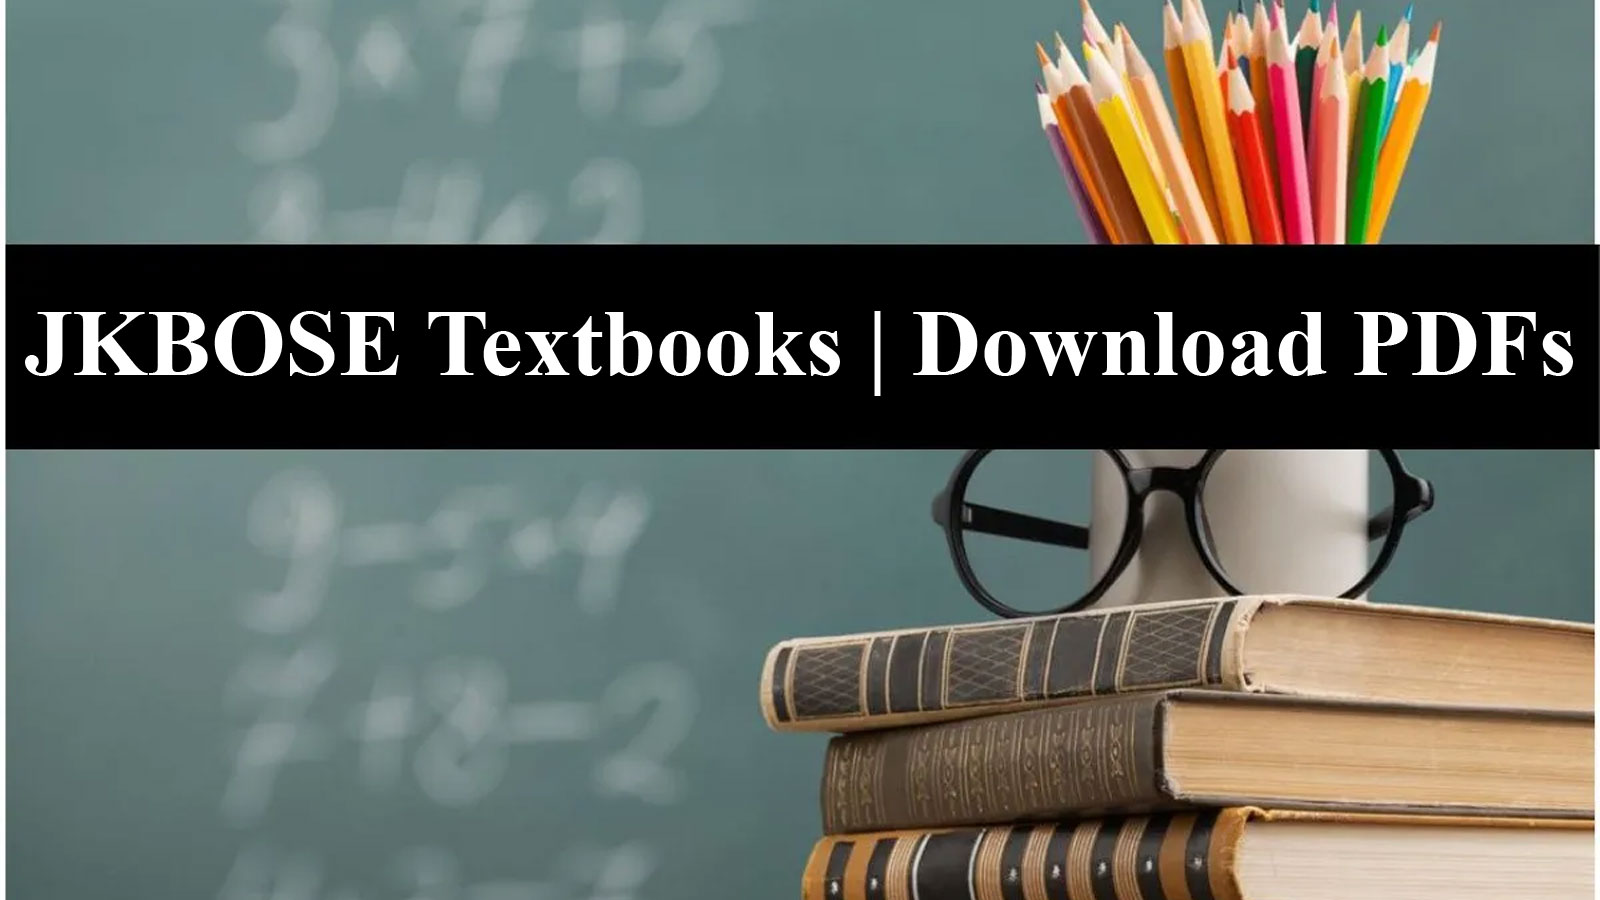 JKBOSE Class 2 Textbooks: Direct Link to download PDFs